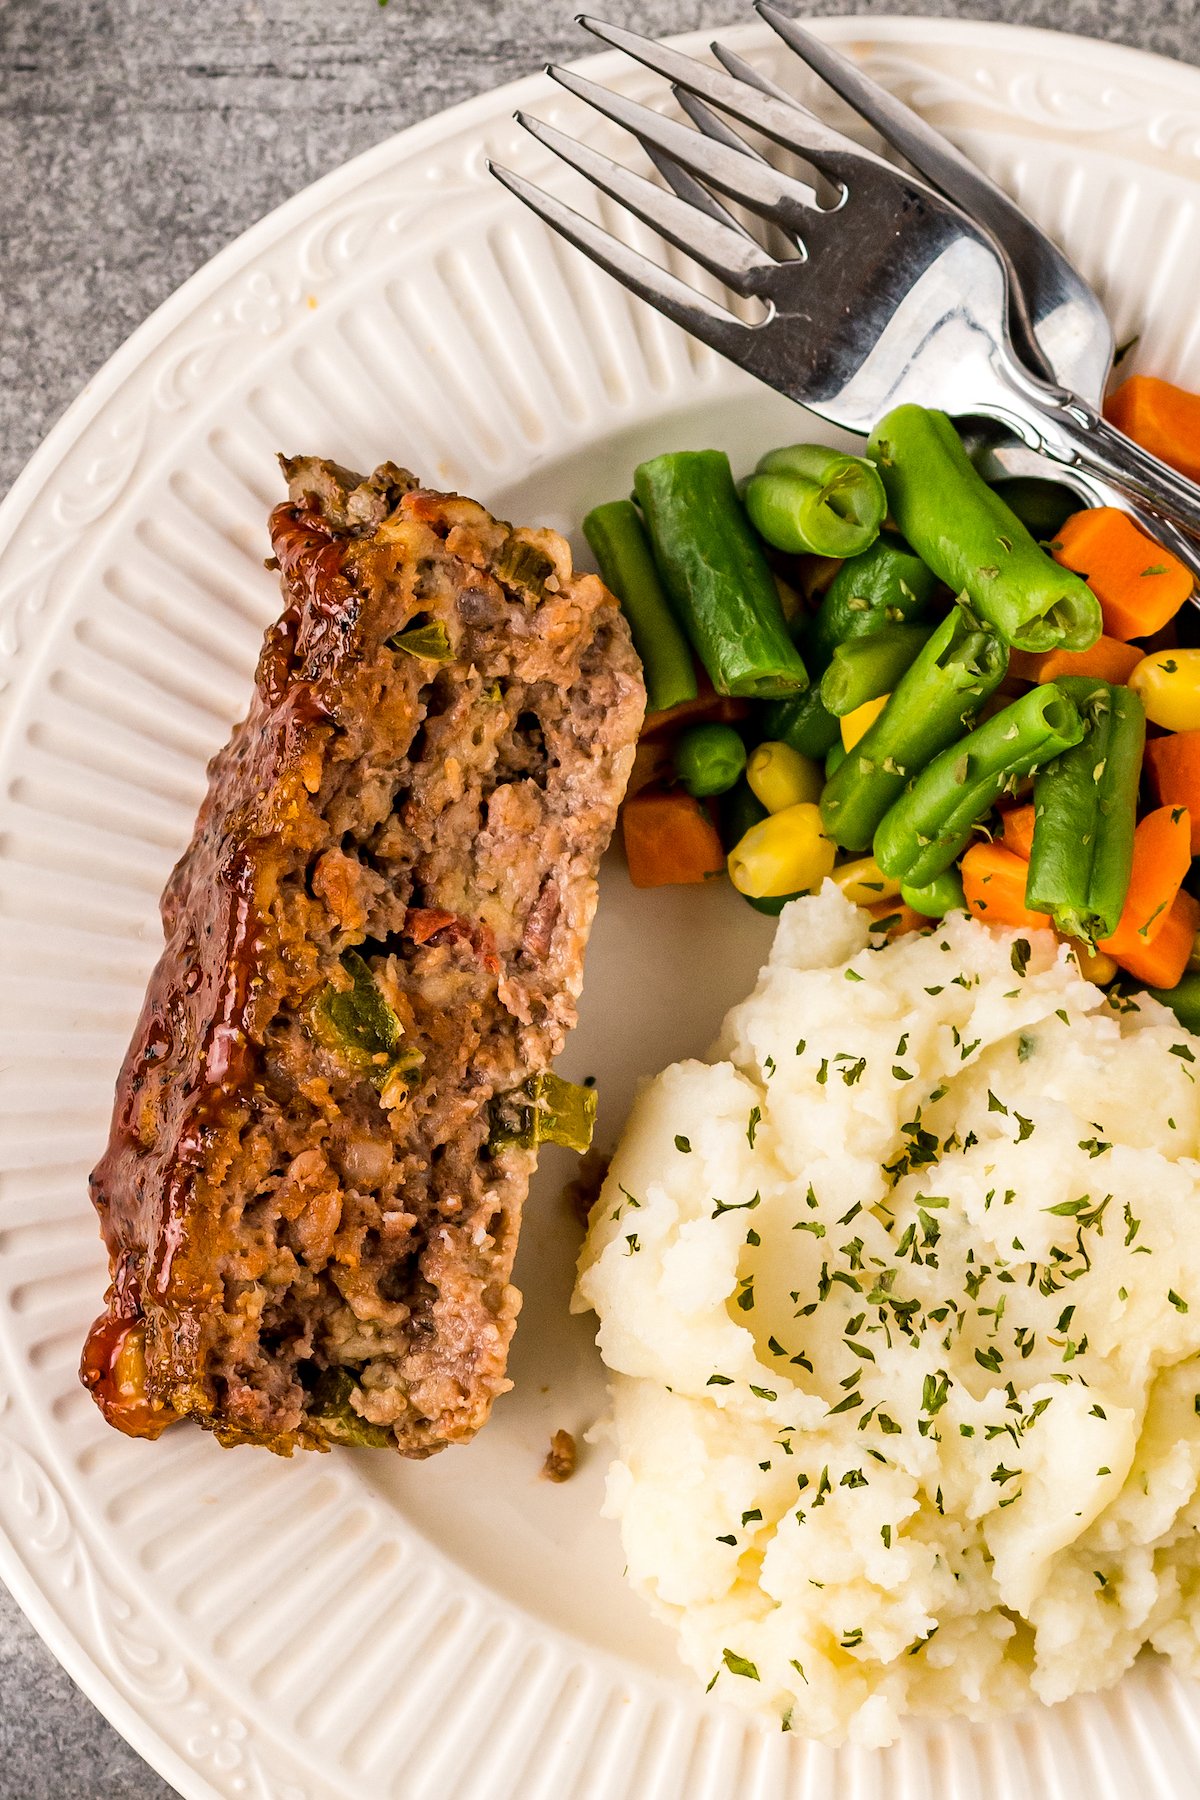 A dinner plate with ground beef loaf, mashed potatoes, and mixed vegetables.